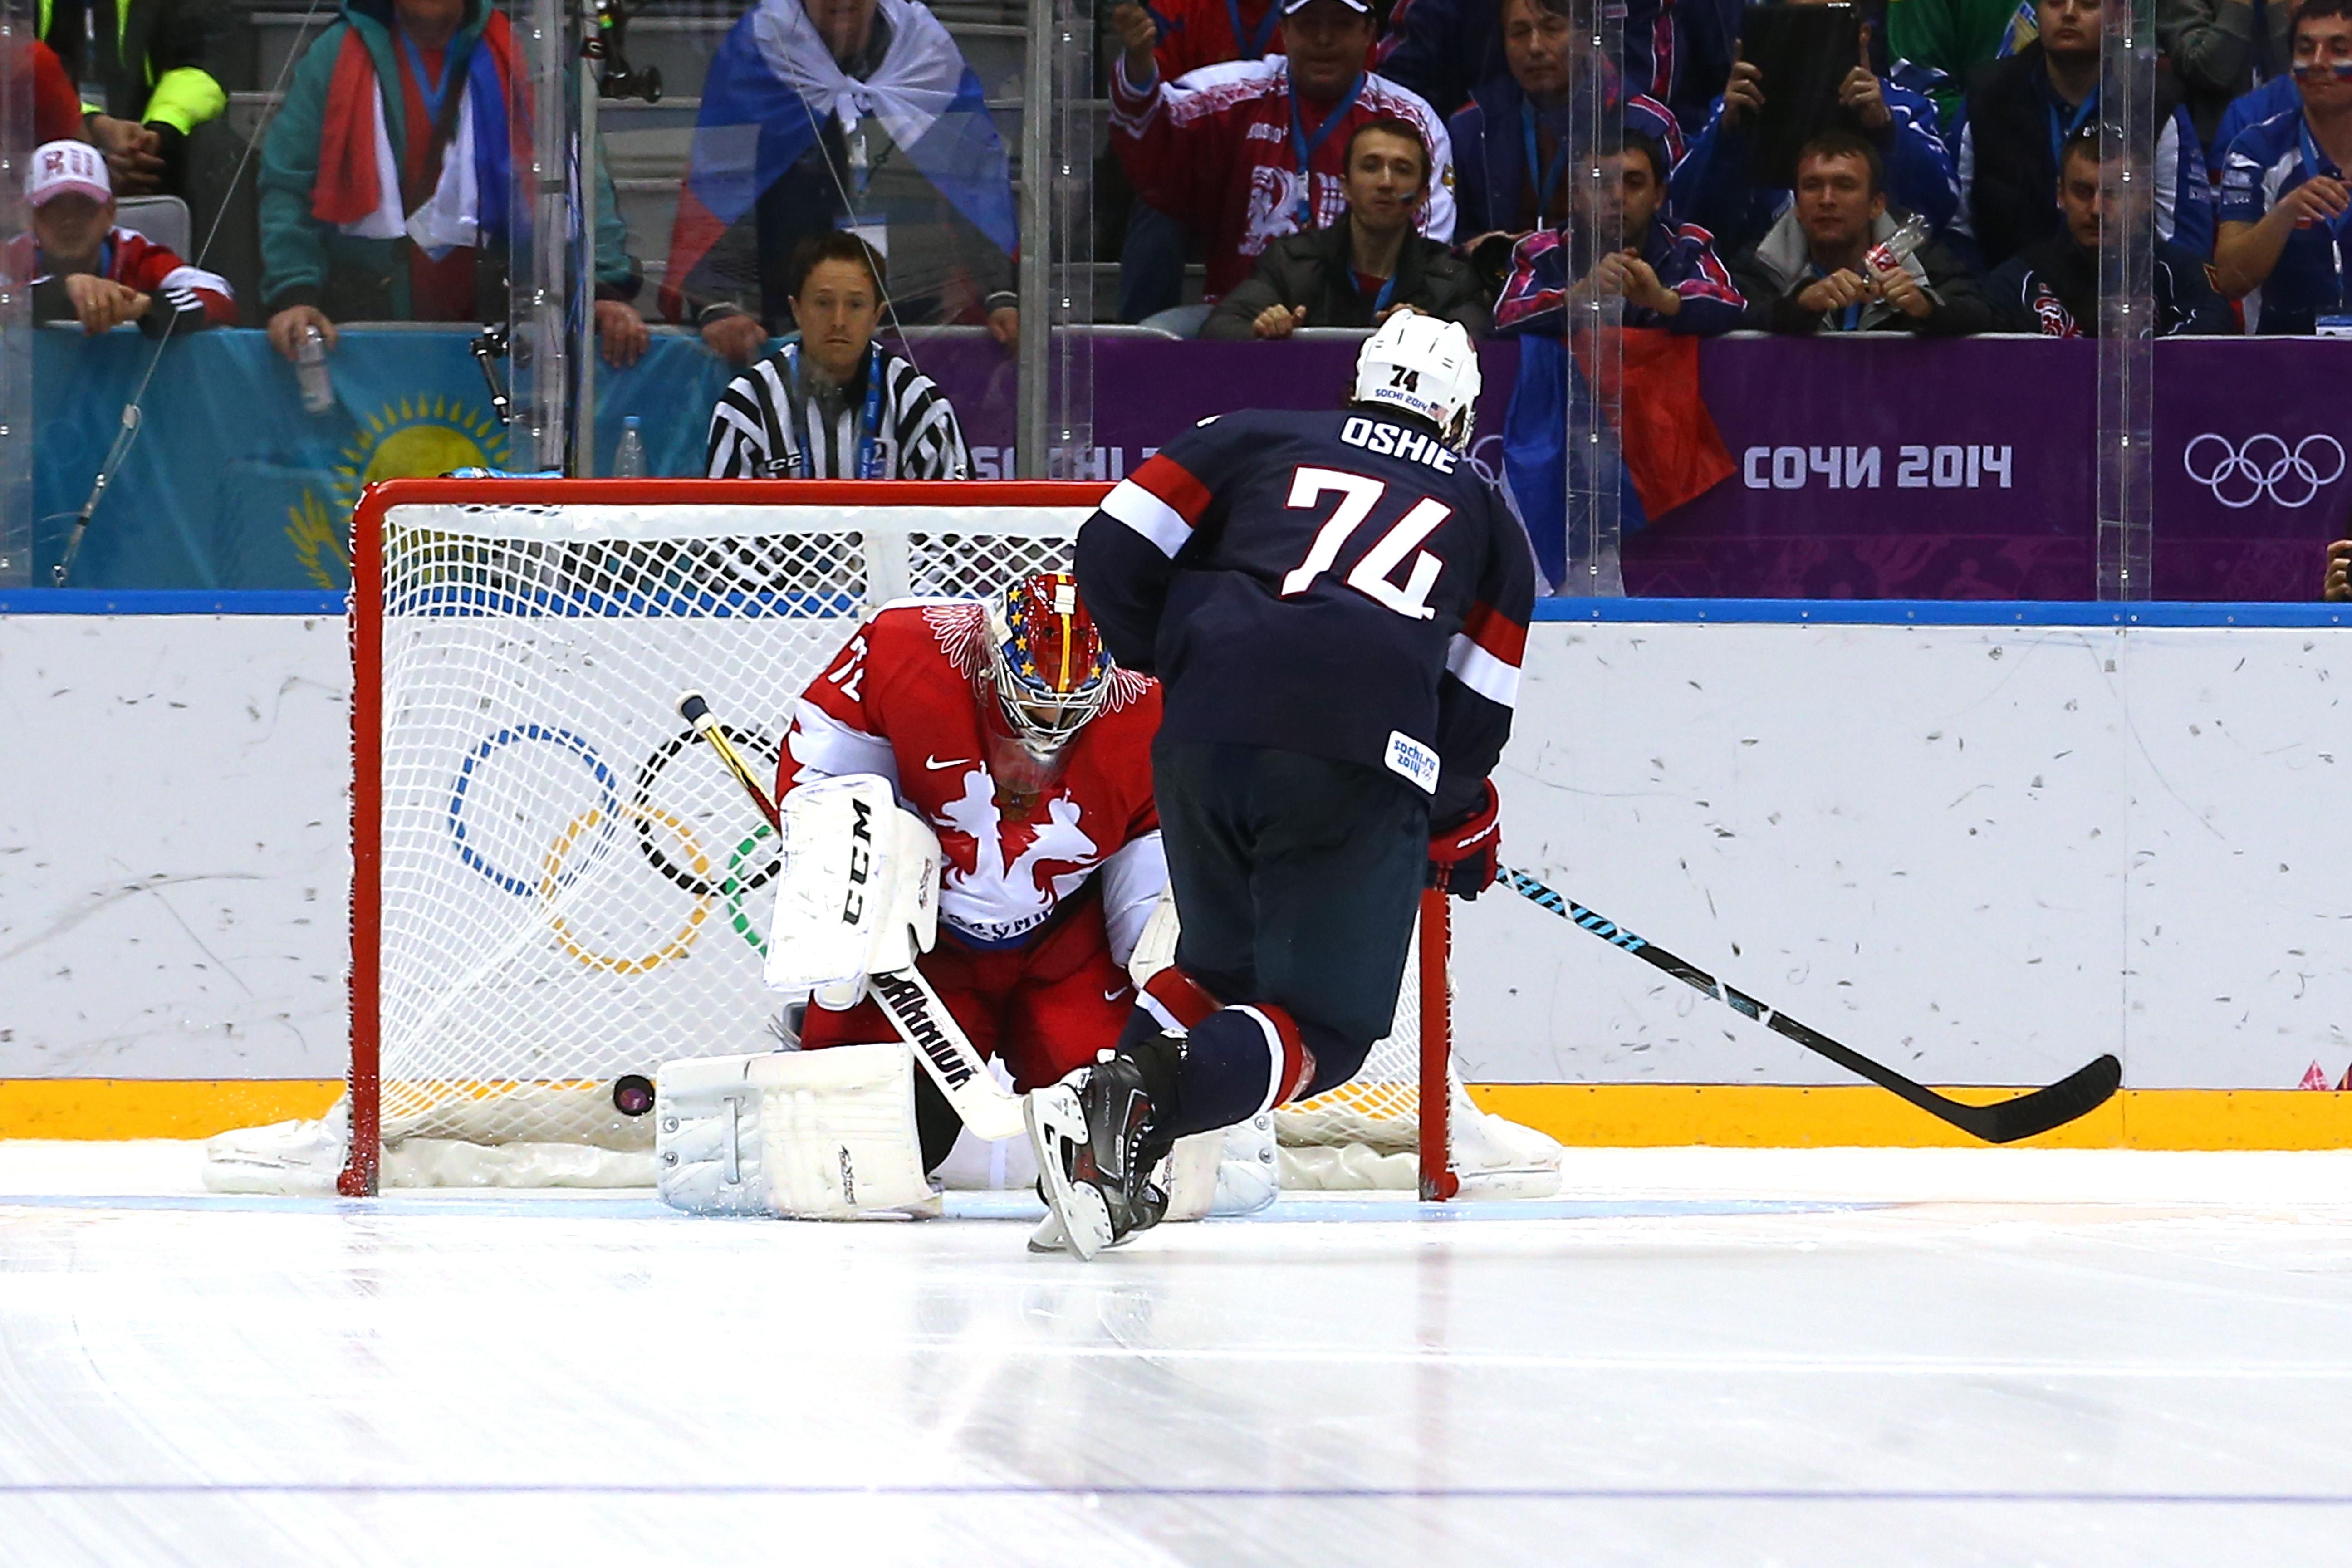 United States outlasts Russia in epic shootout. USA TODAY Sports Wire